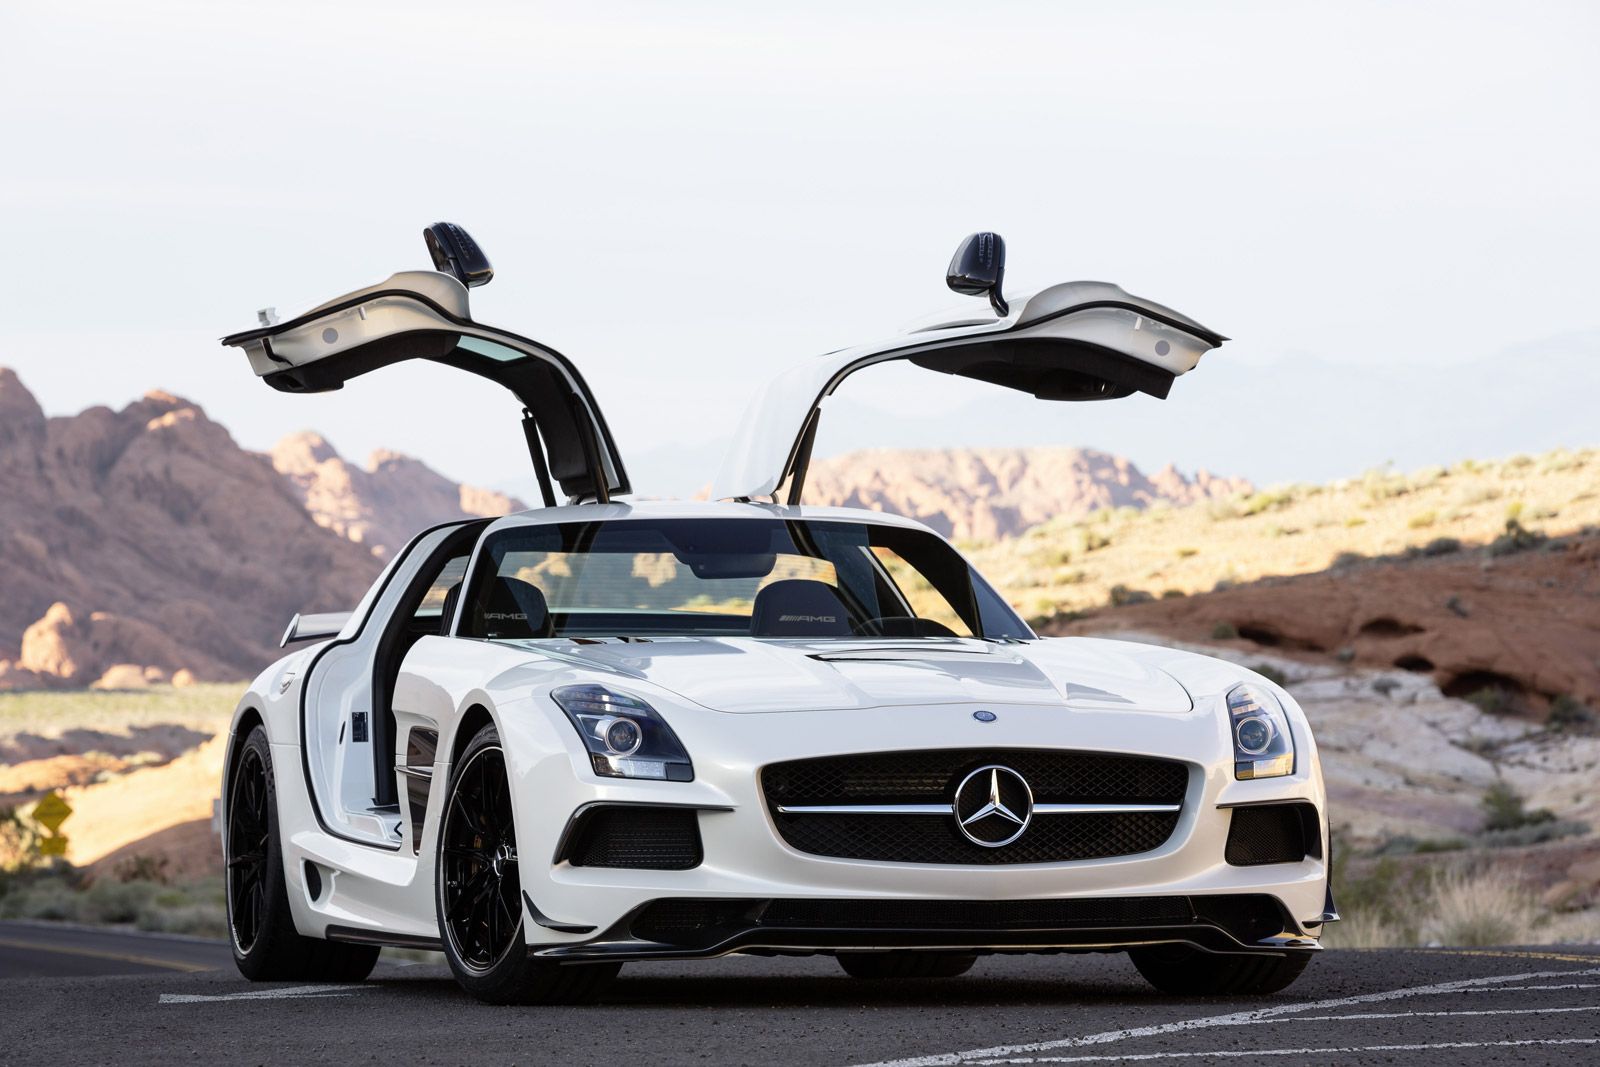 Mercedes Benz SLS AMG Review, Ratings, Specs, Prices